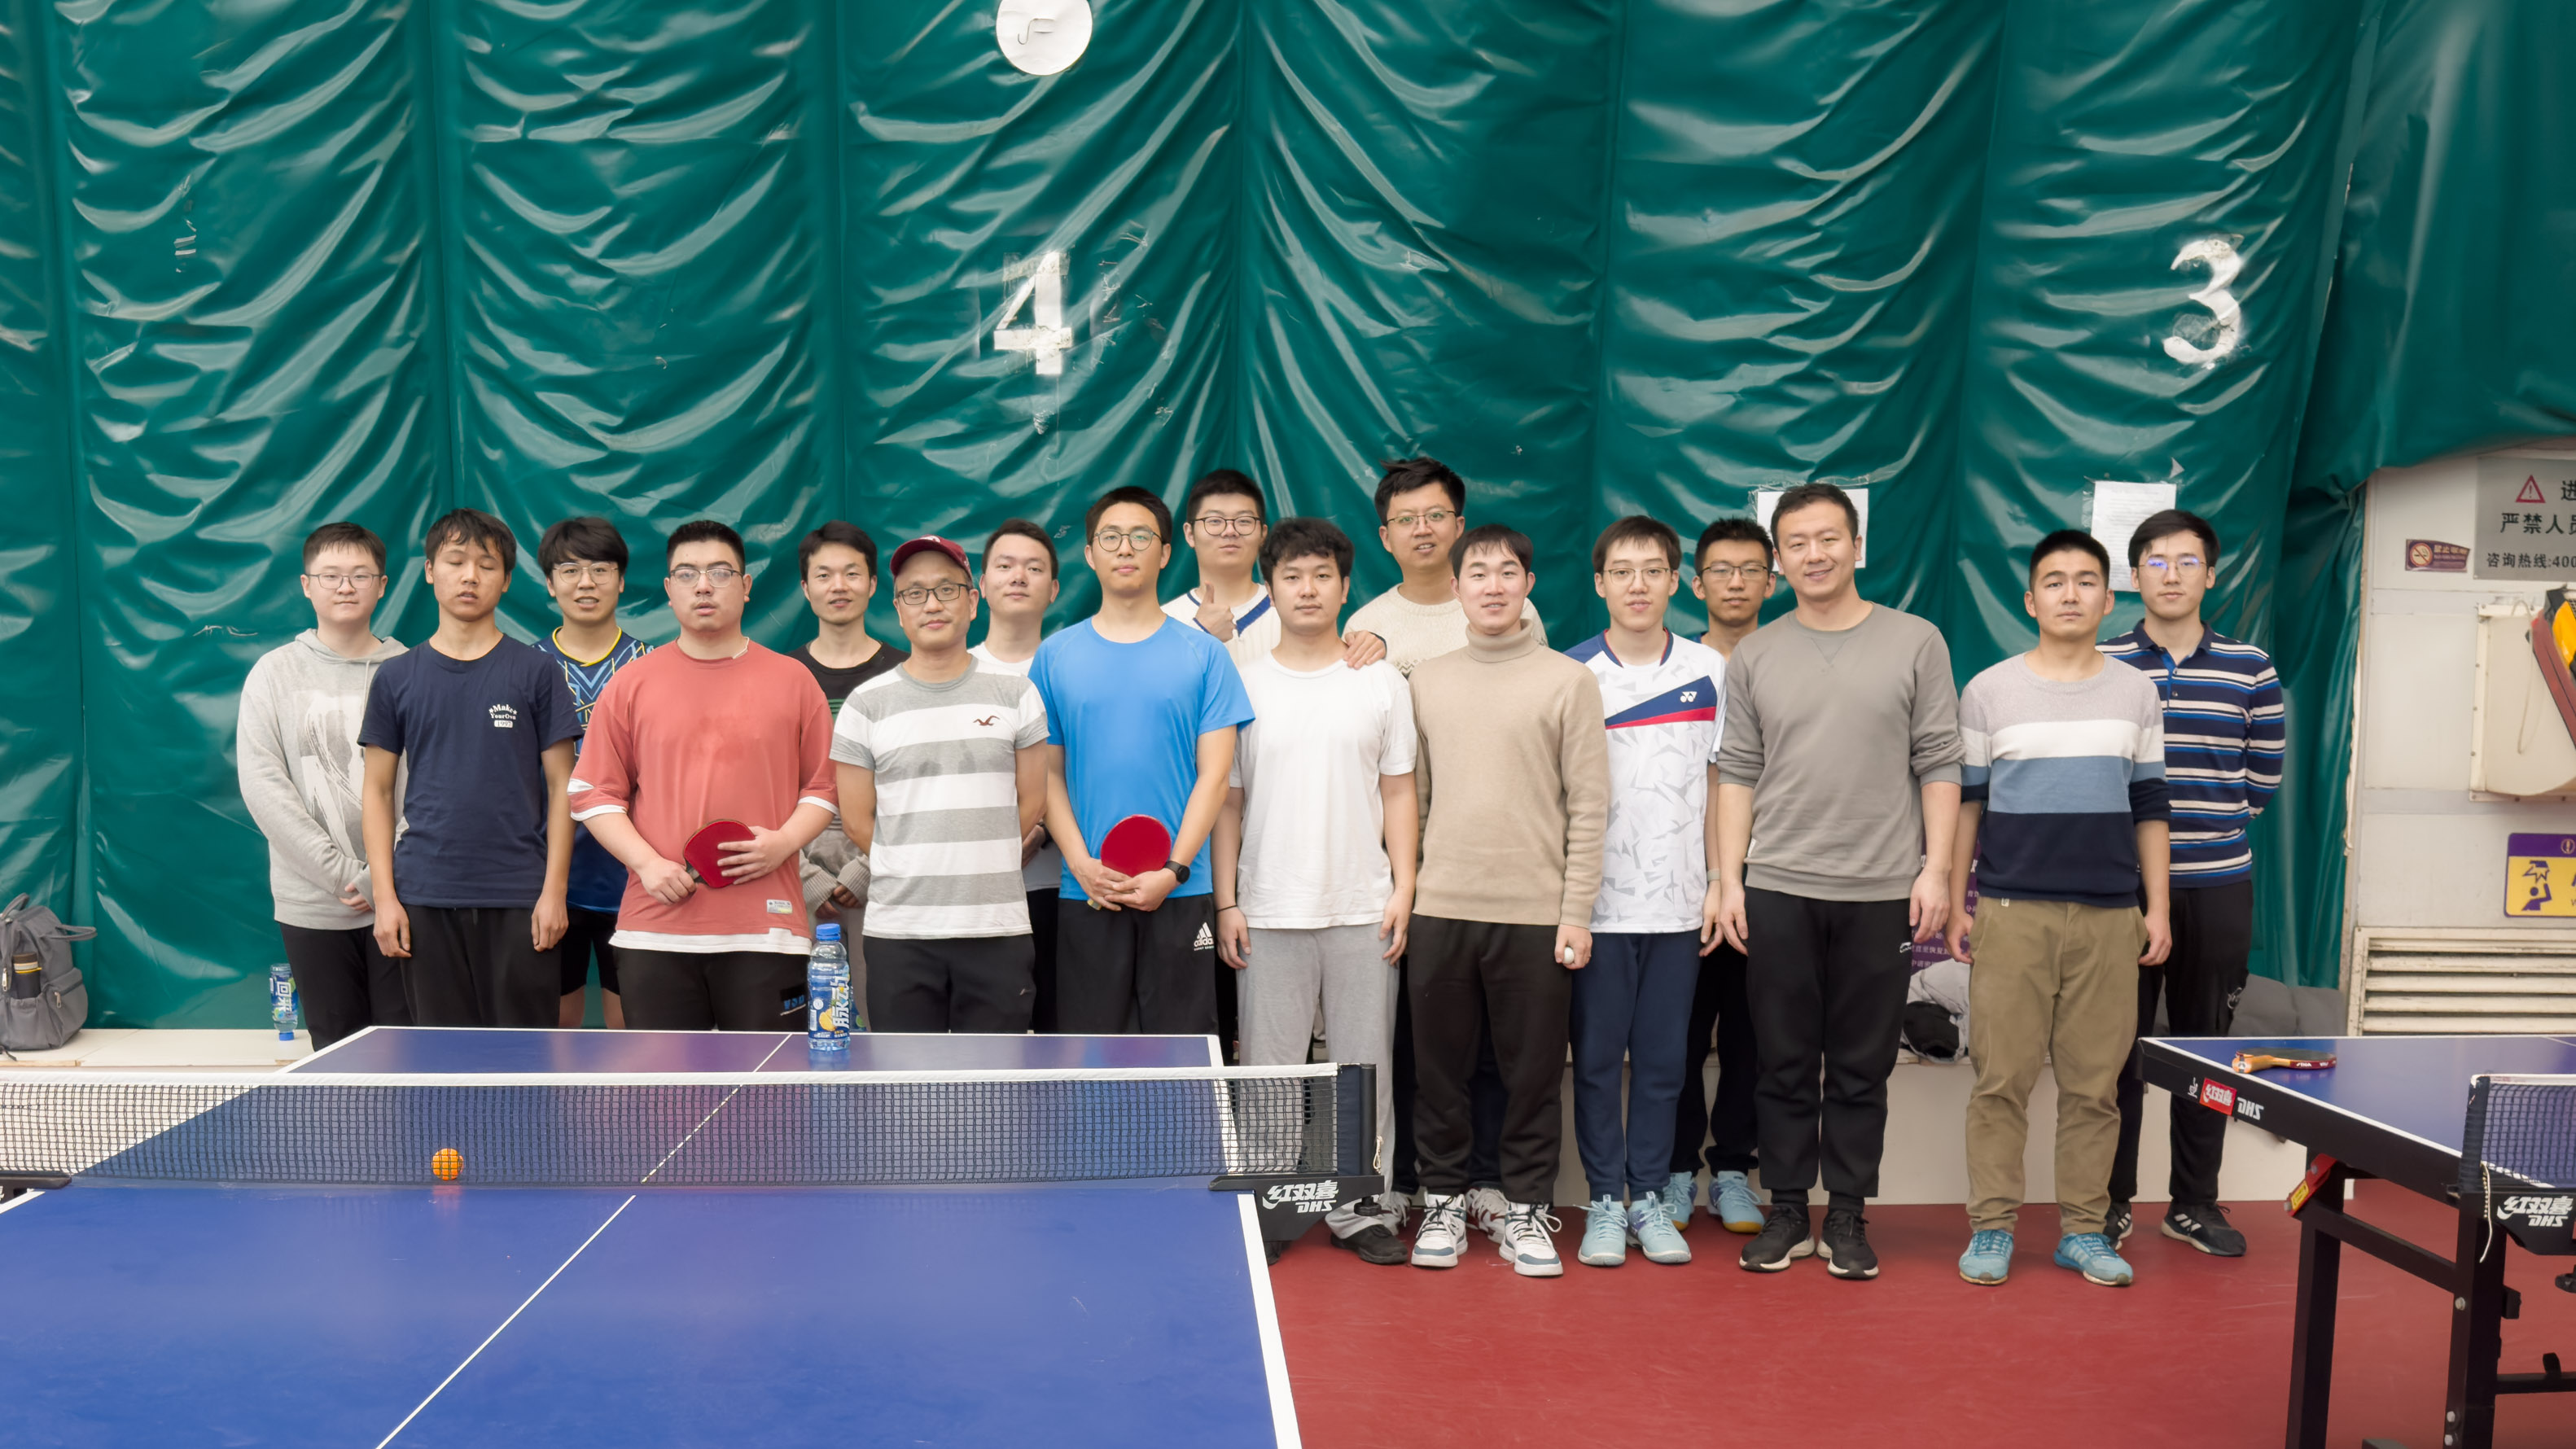 The 4th Table Tennis Tournament of Xu’s Group